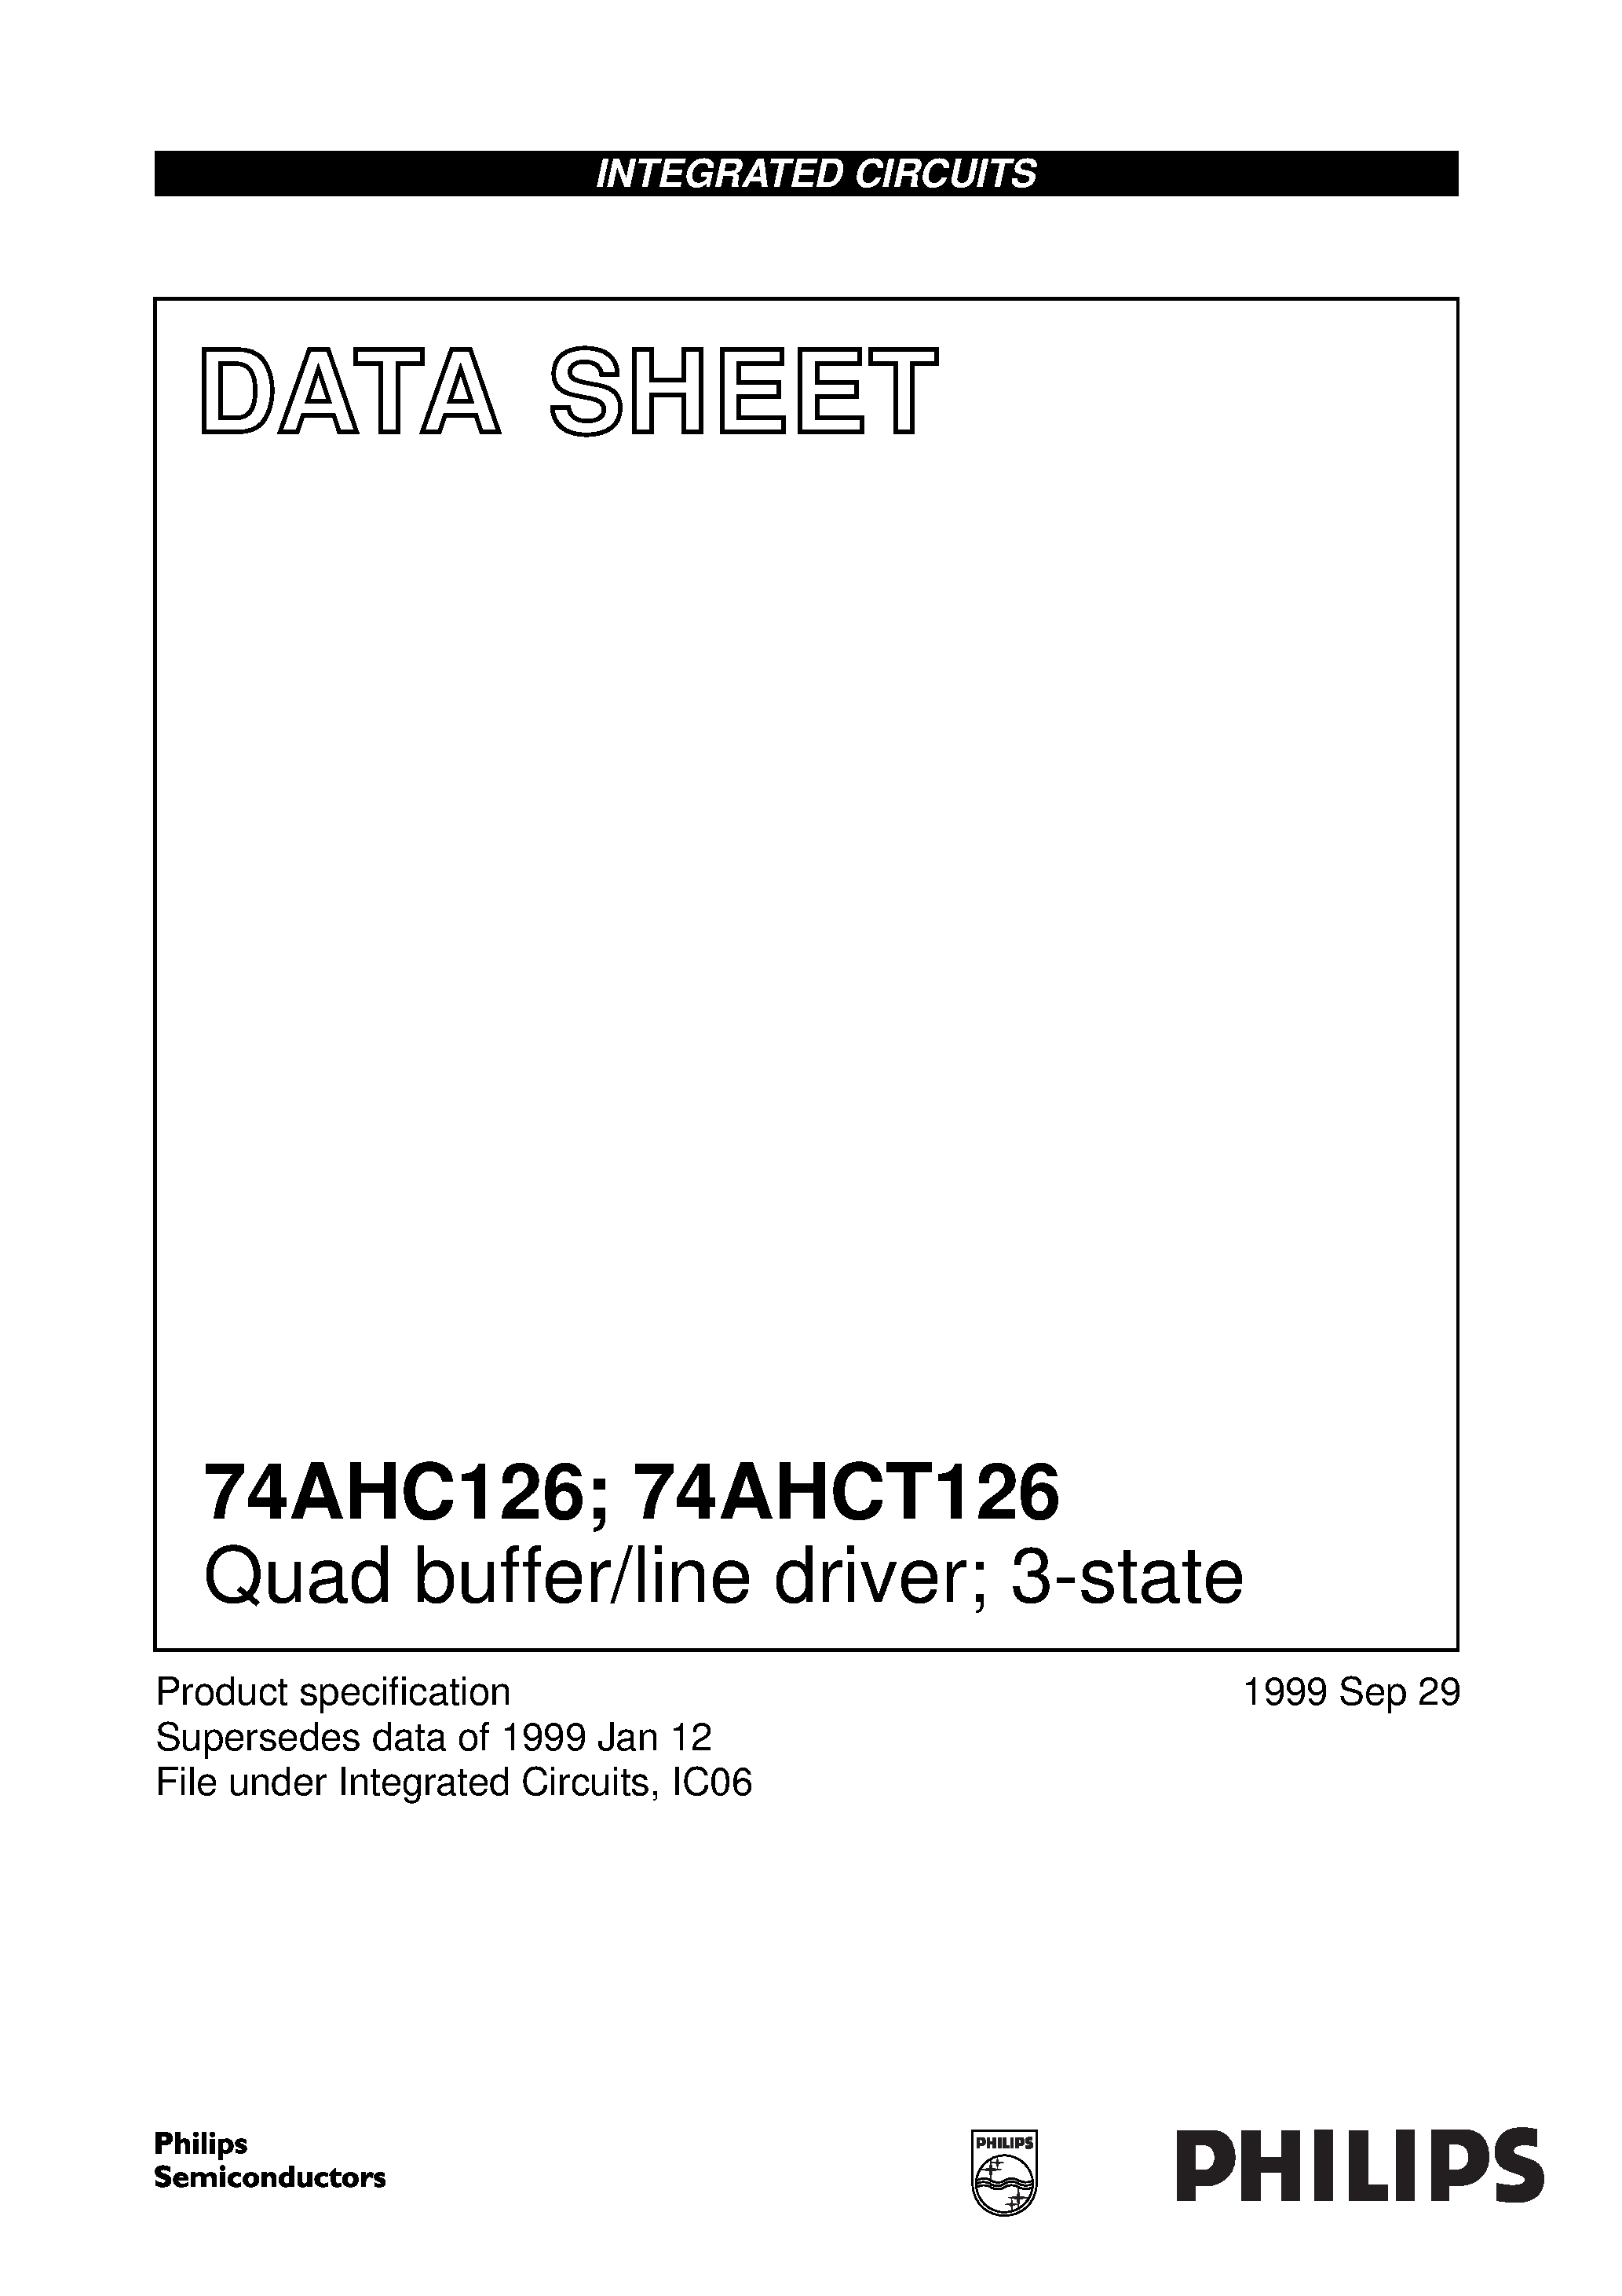 Datasheet 74AHC126PW - Quad buffer/line driver; 3-state page 1